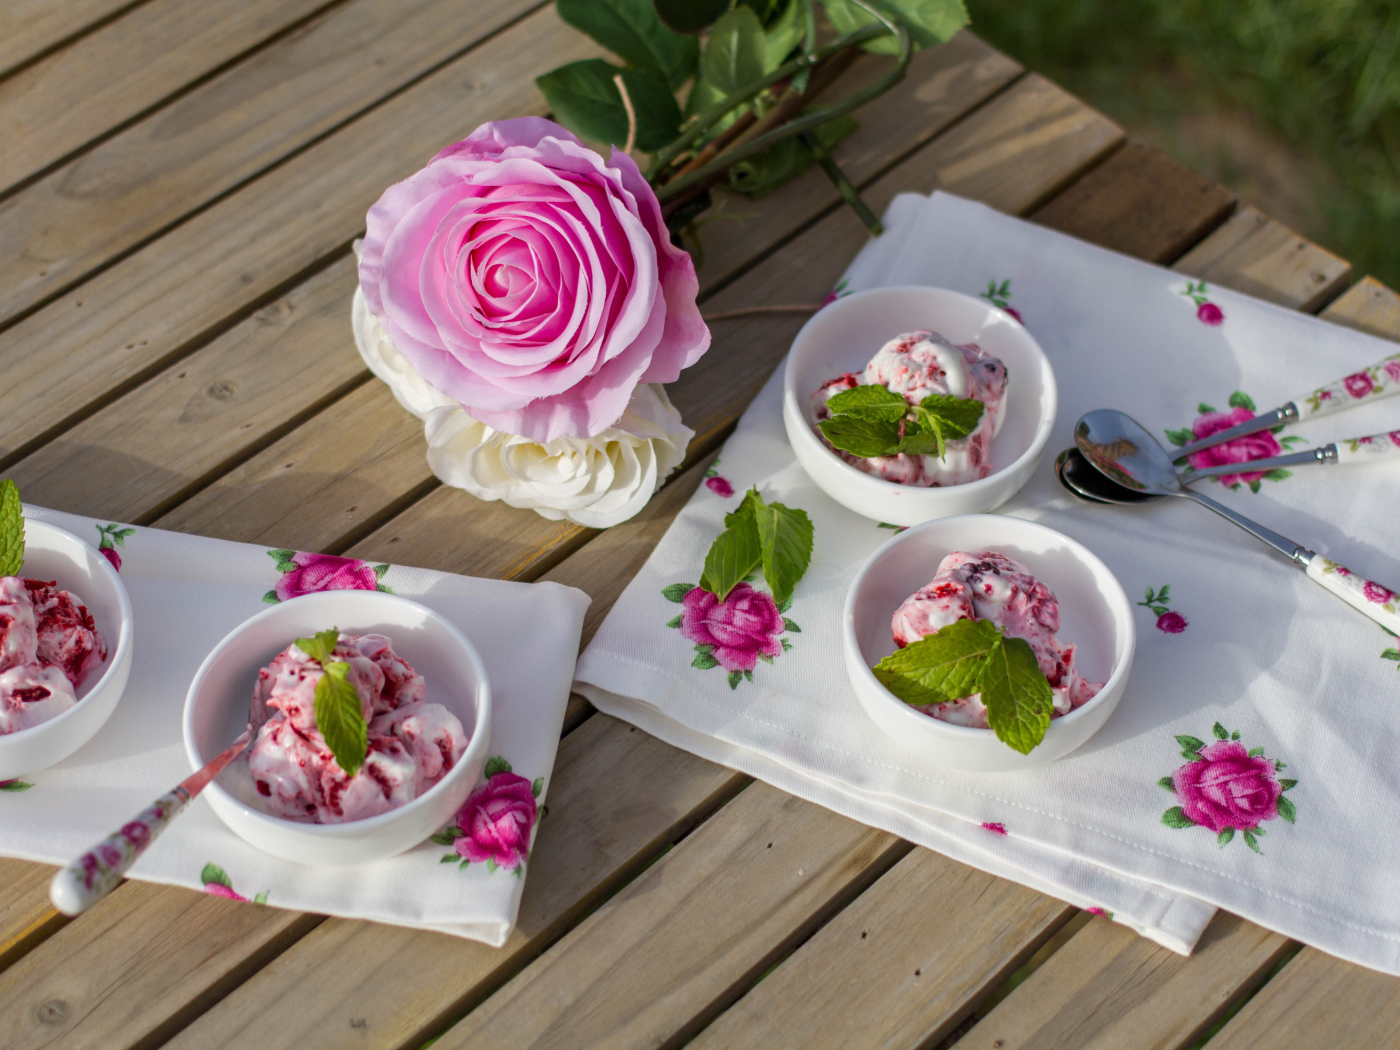 Ice cream on a table with a pink rose